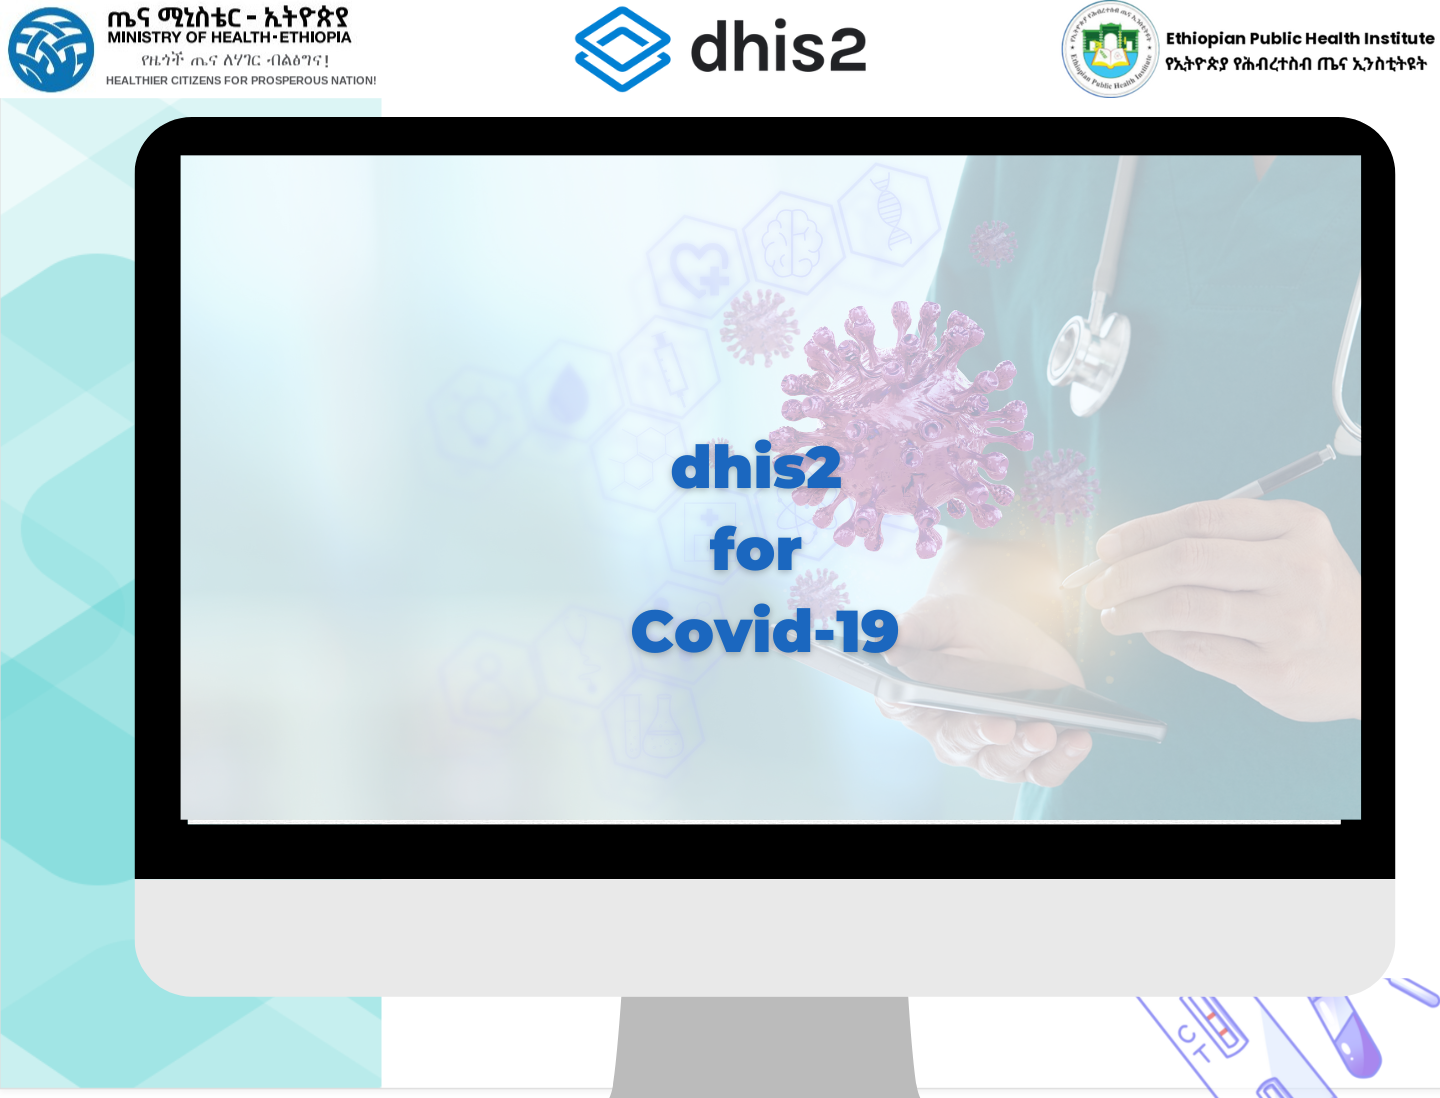 dhis2 for Covid-19